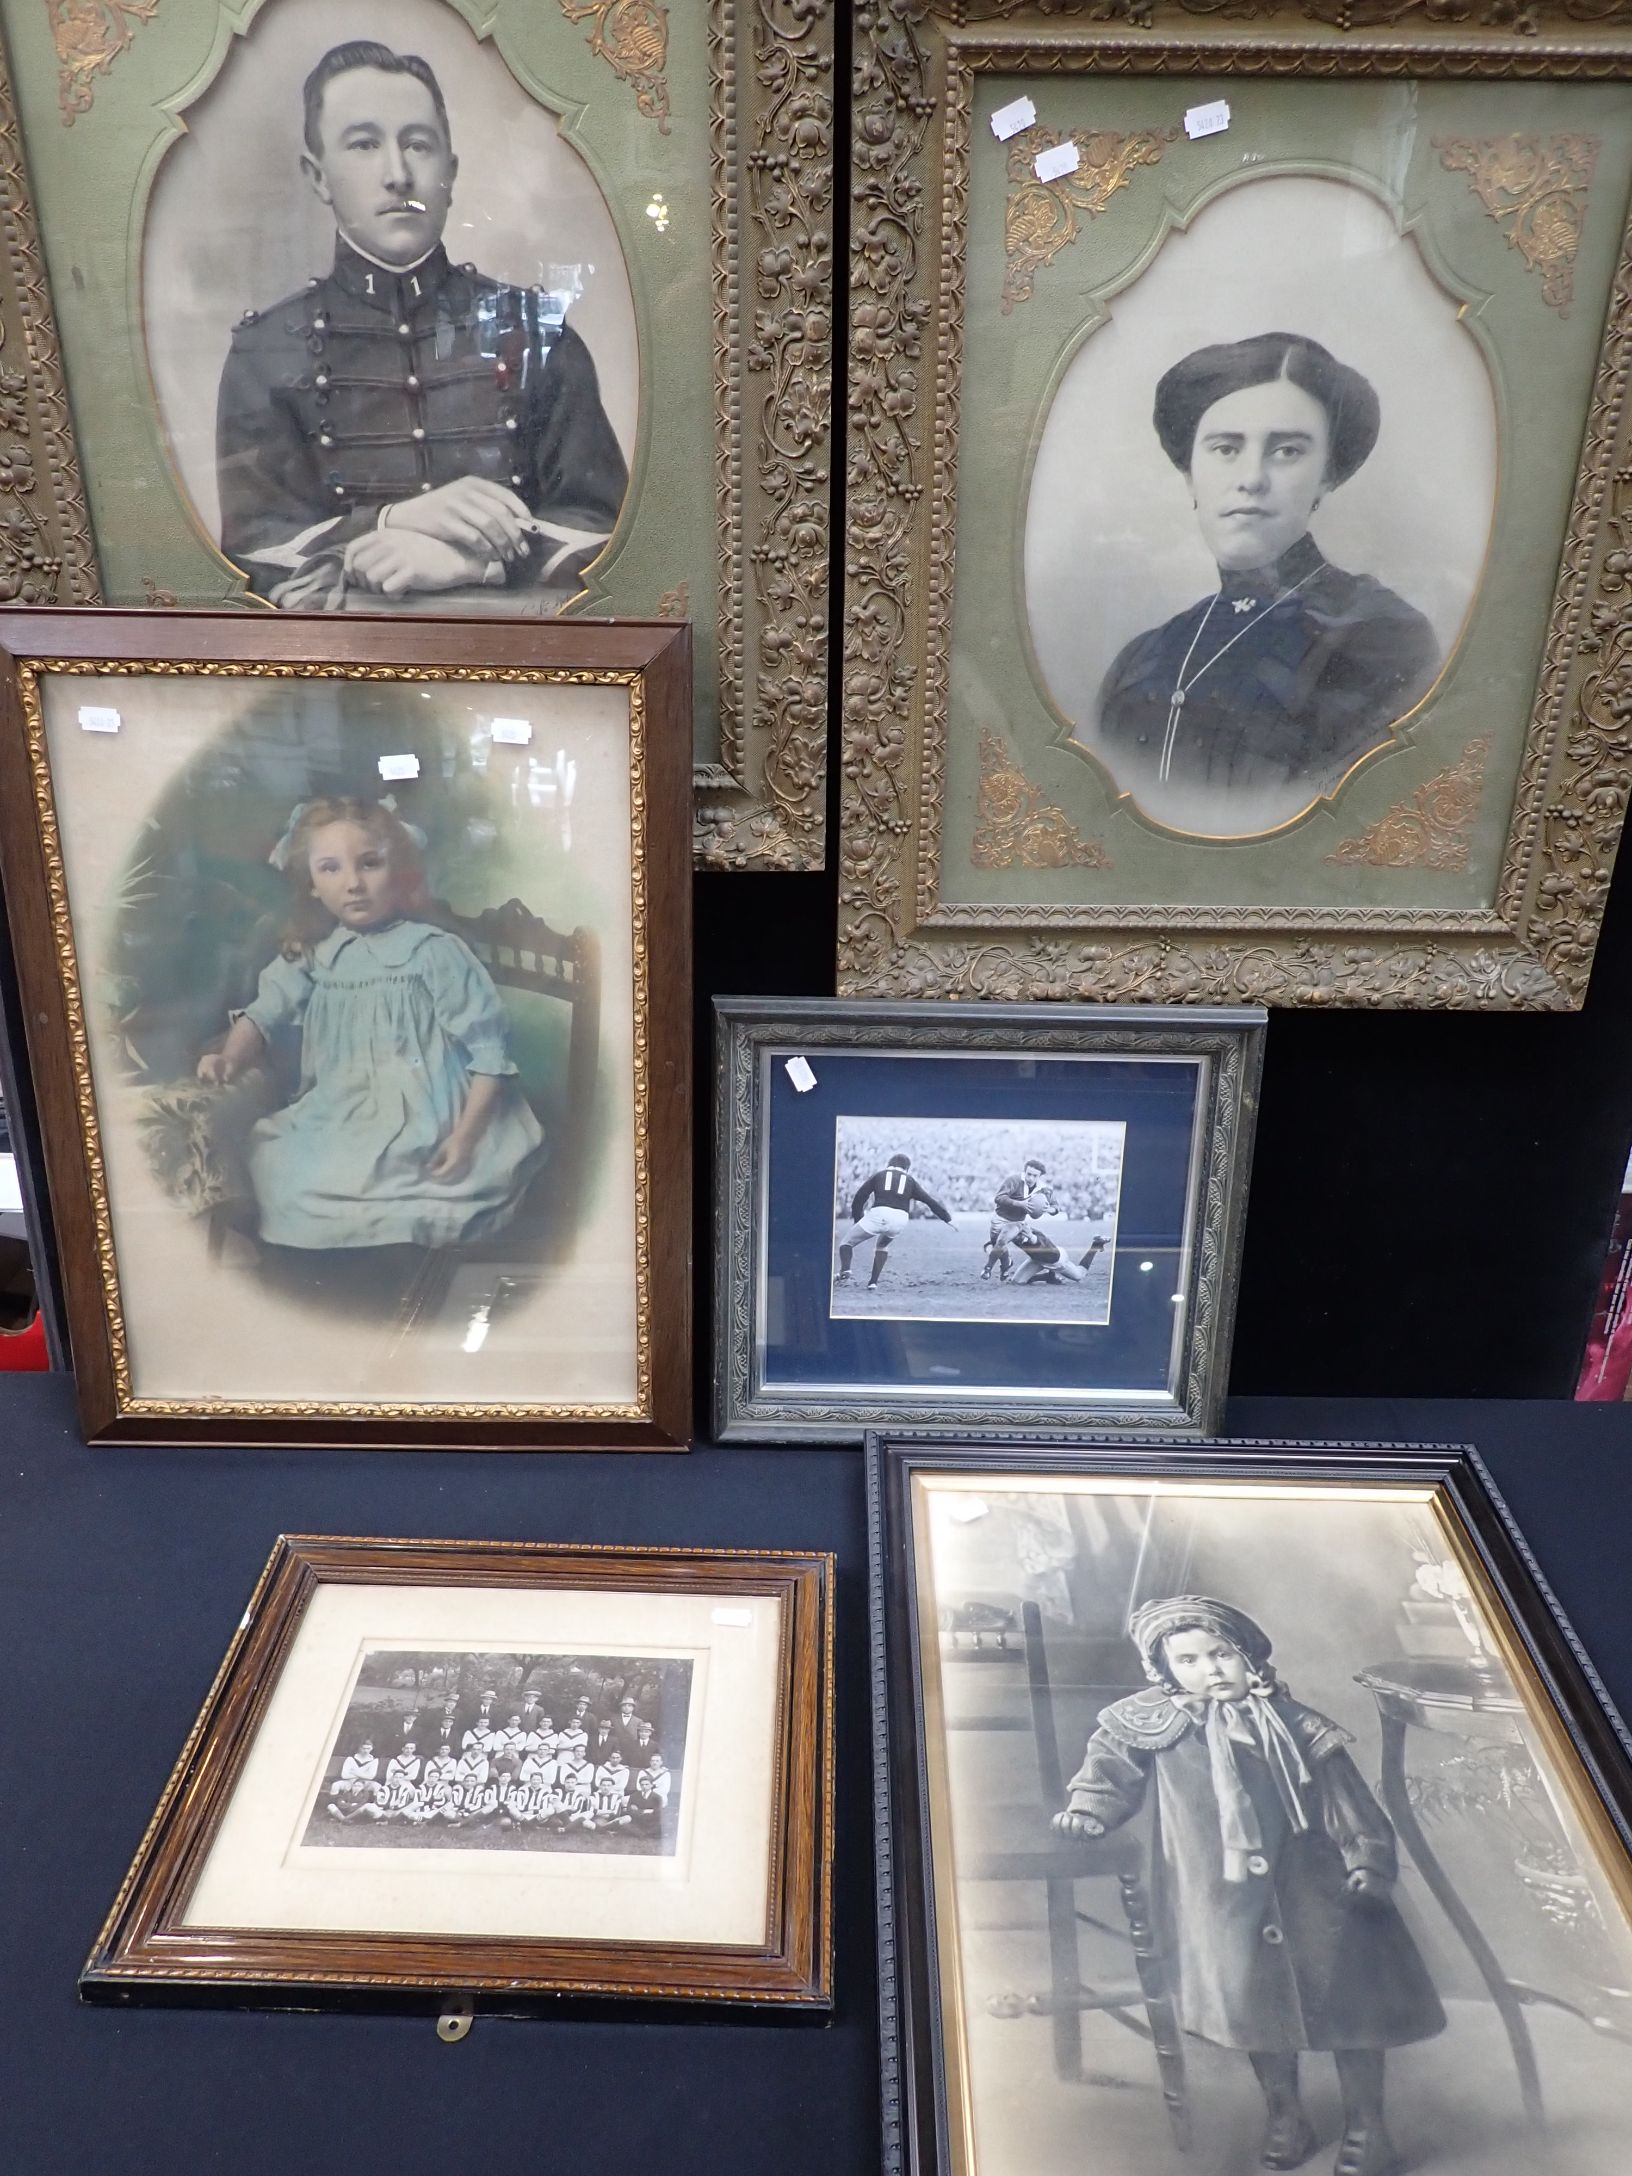 FRAMED PHOTOGRAPHS OF A FRENCH OFFICER AND WIFE